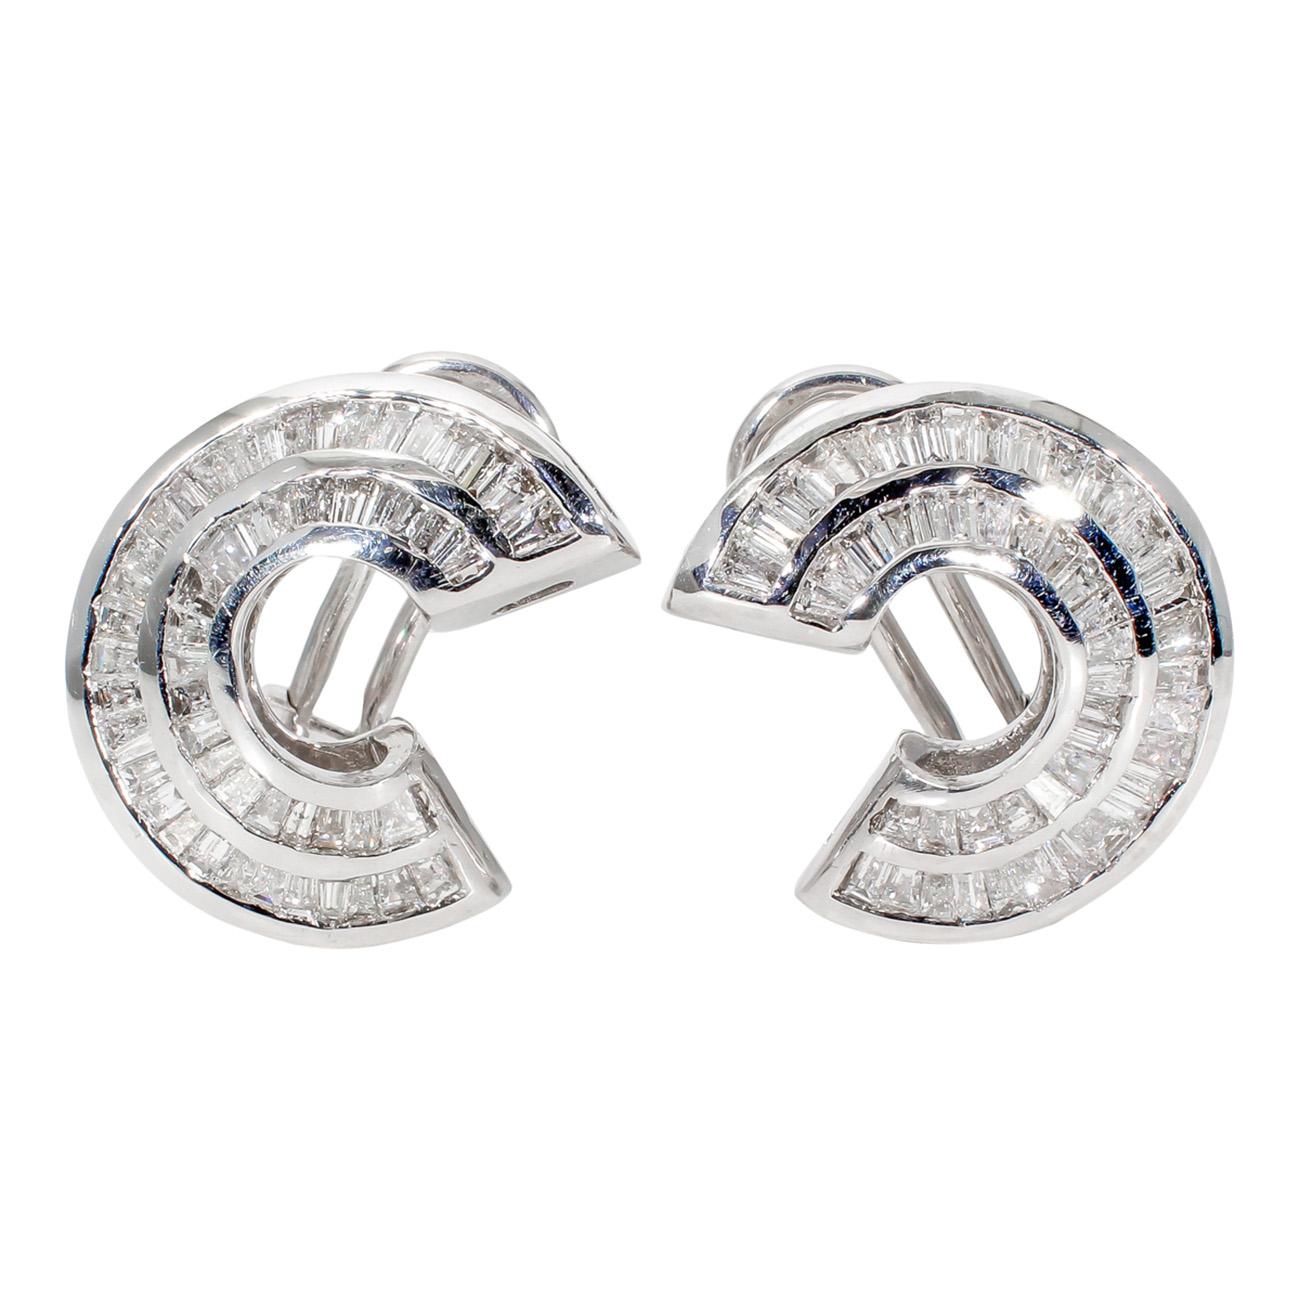 Curved French clip earrings in 14k white gold with channel set tapered baguette diamonds.  D2.75ct.t.w.